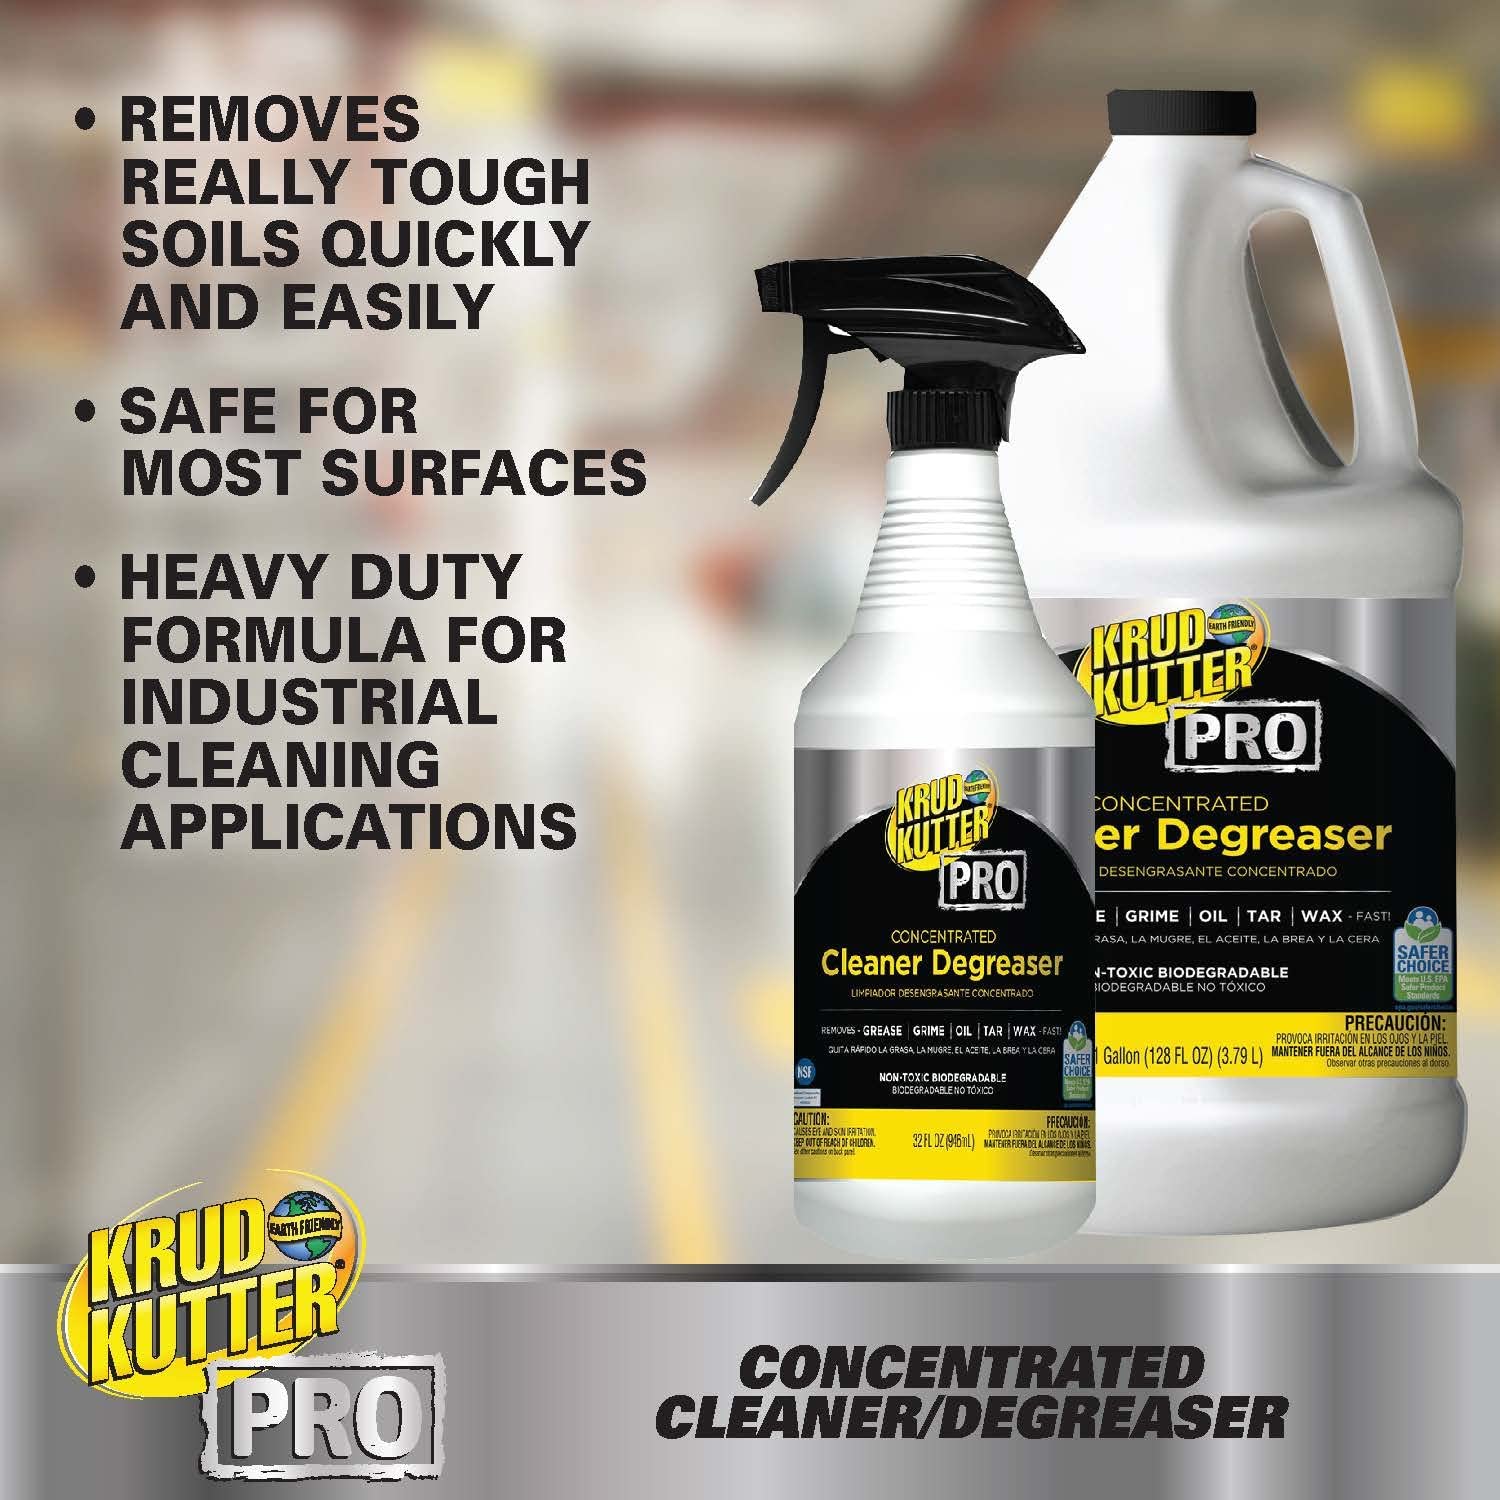 Krud Kutter Pro Cleaner Degreaser - Concentrate Spray - 32 oz (2 lb) - 1 Each - Clear - image 3 of 6